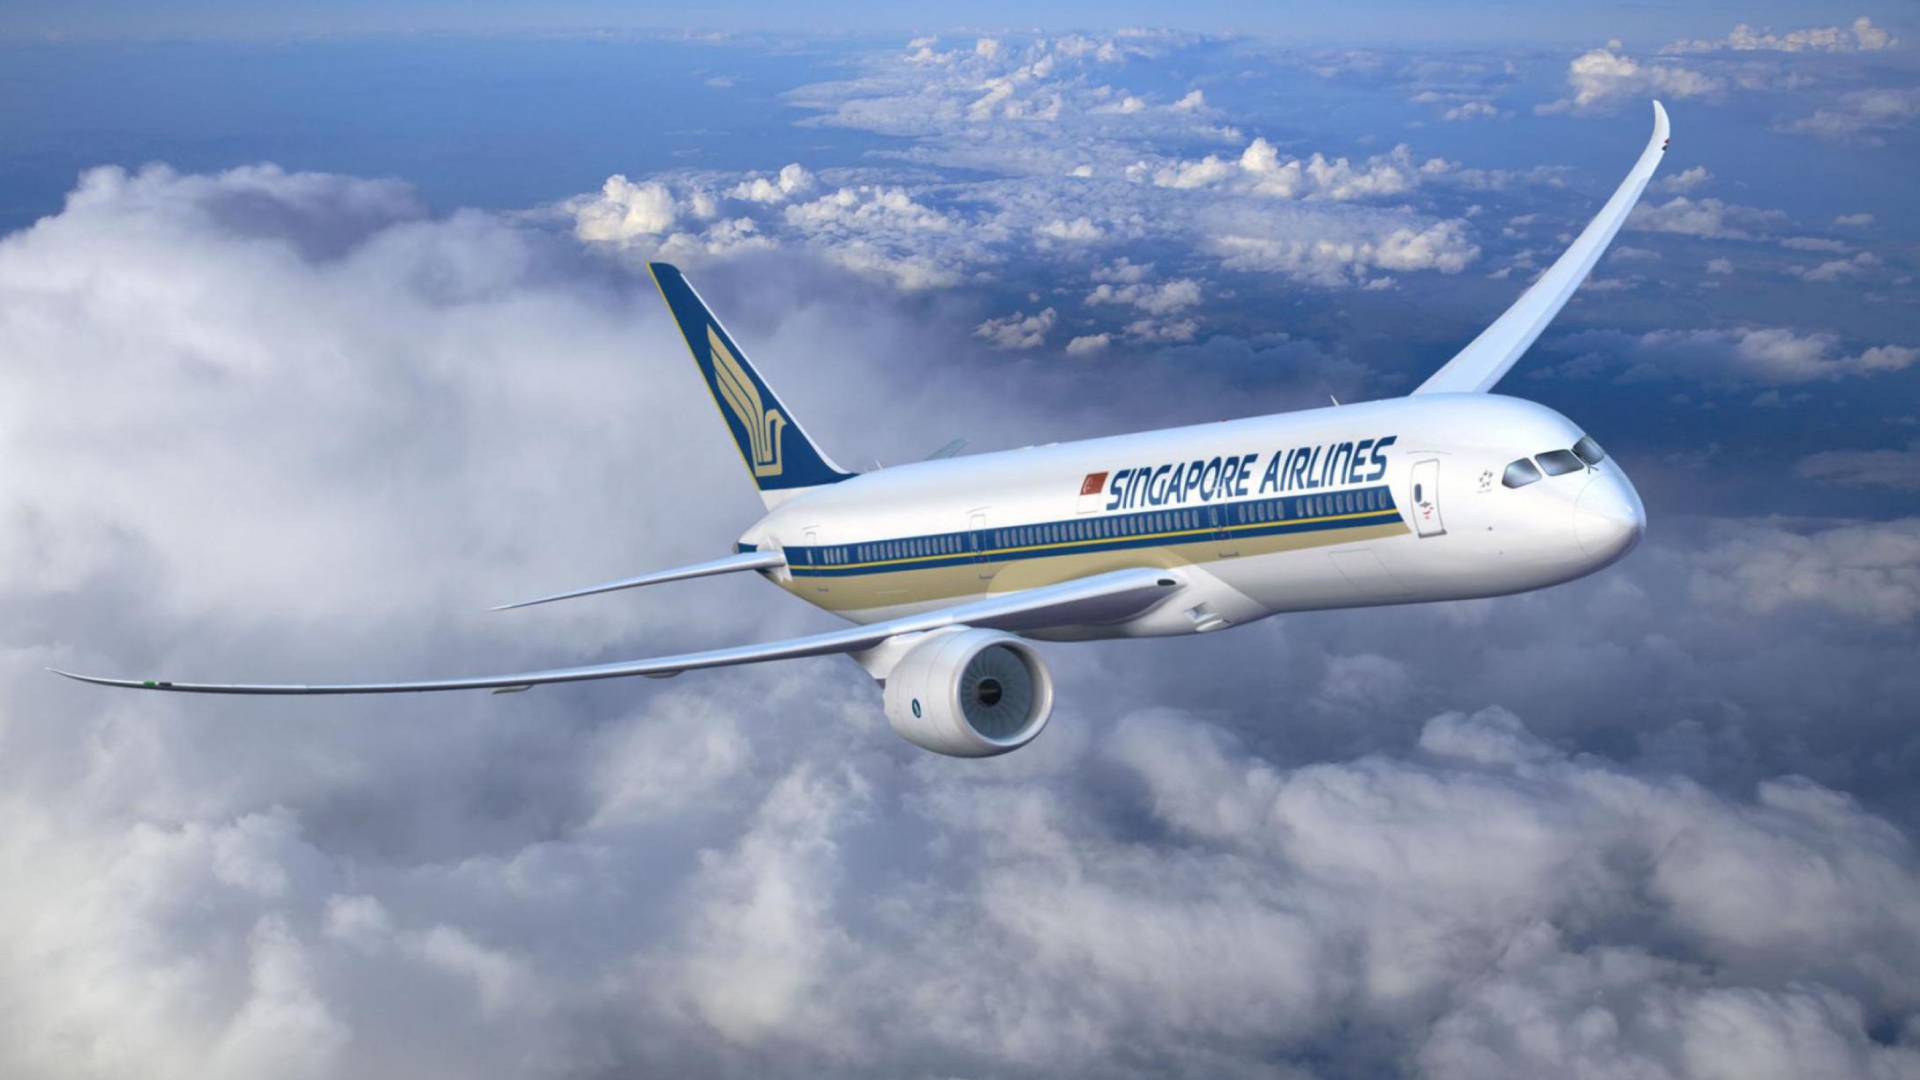 Singapore Airlines wallpaper 1920x1080